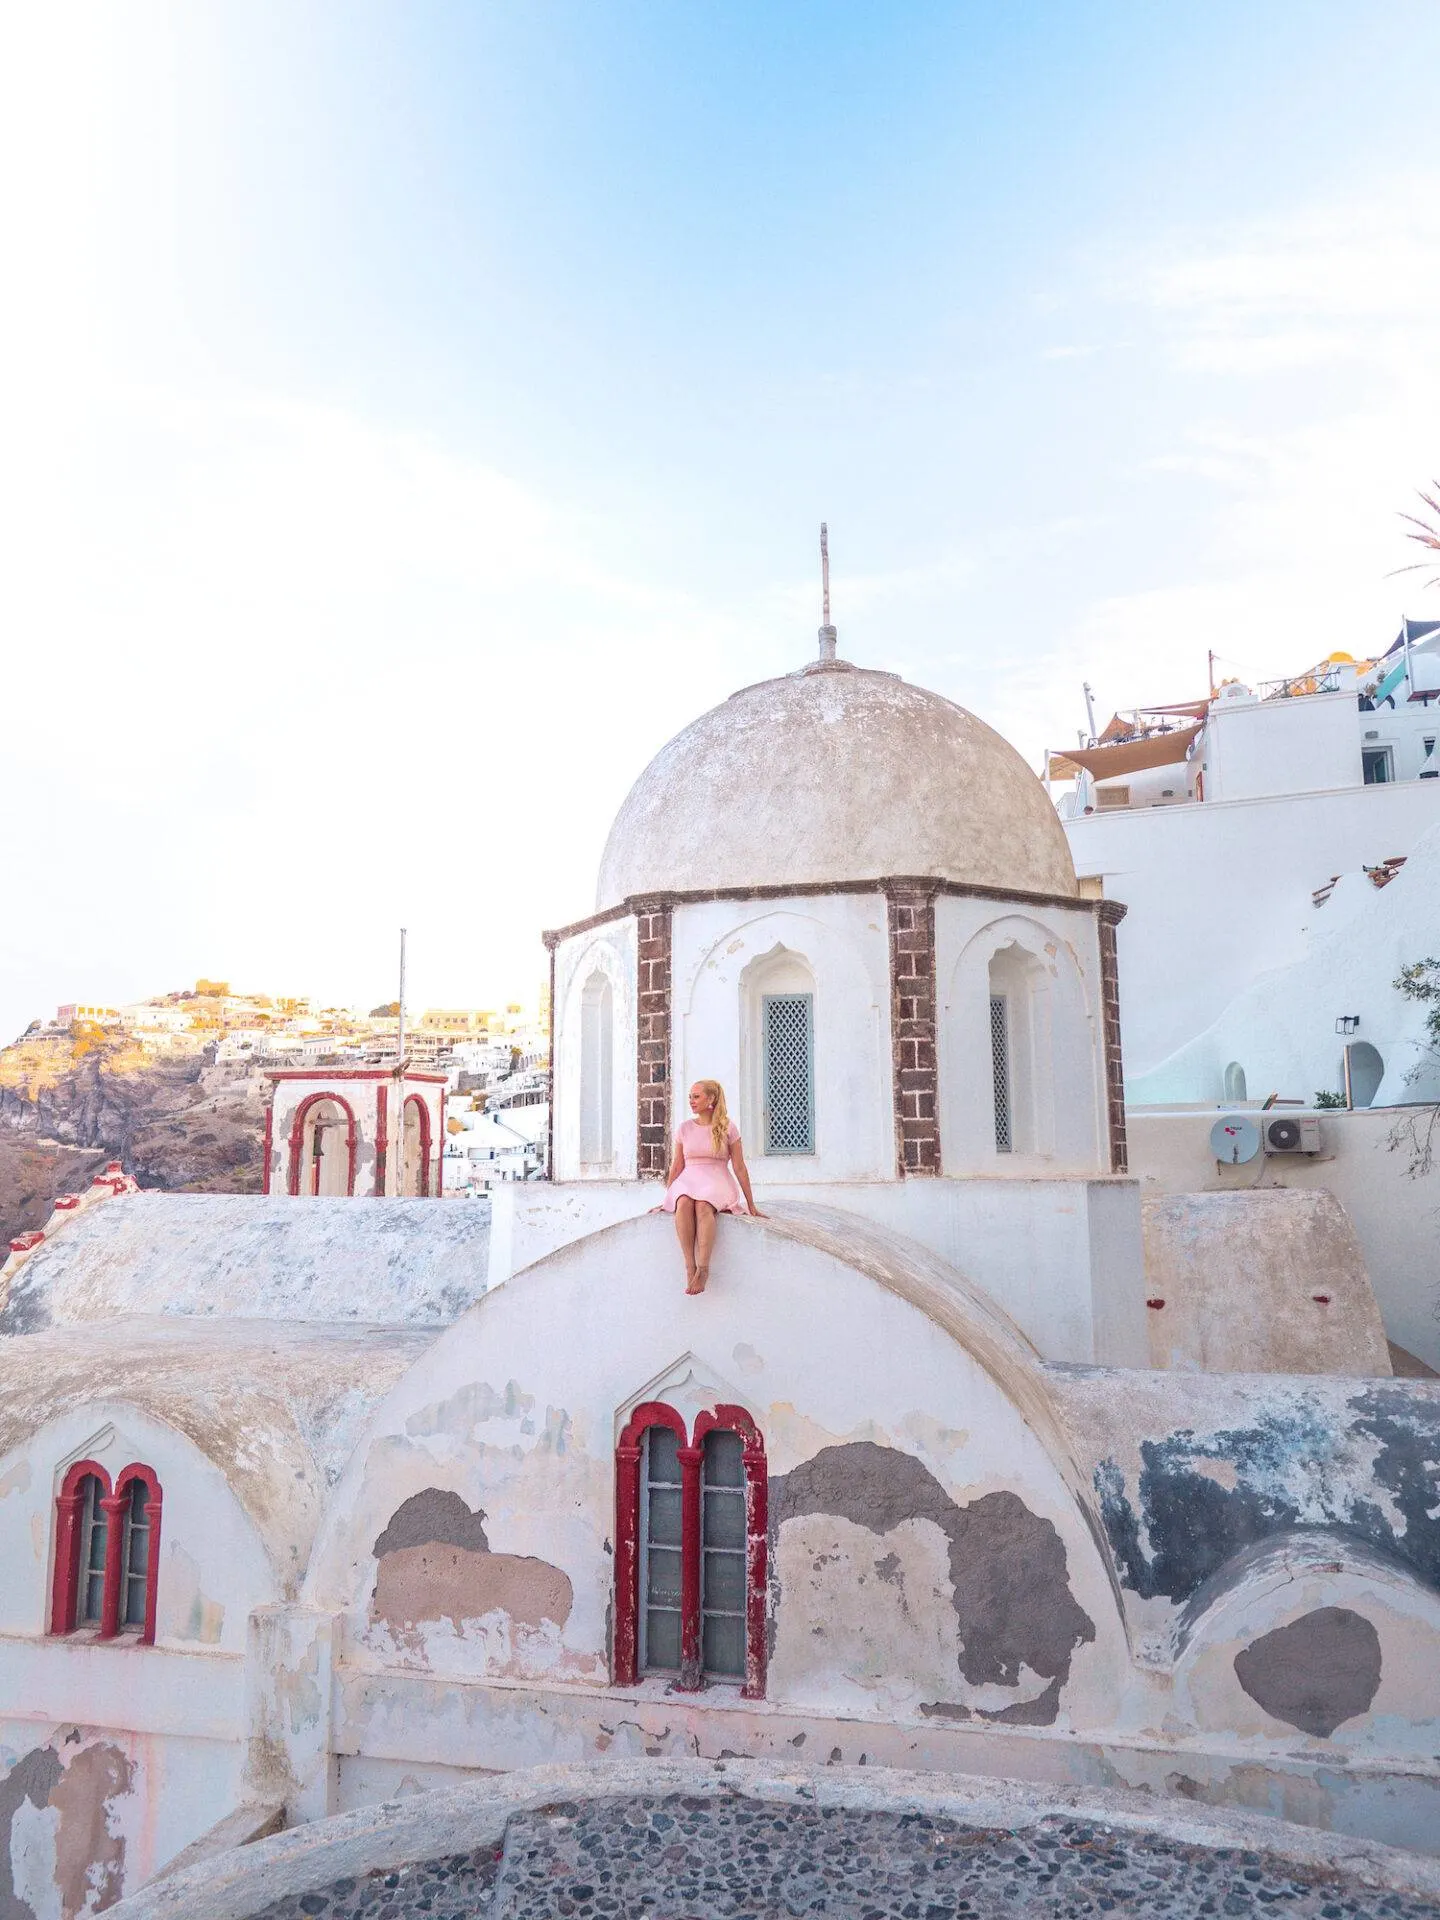 Dying to visit Santorini but think it's the kind of trip that's lavishly expensive? Visiting Santorini on a budget is completely possible and I'm here to tell you how! From flight and hotel bookings to dining and activity recommendations, read this guide to find out exactly how you can visit Santorini on a budget. Pictured here: Fira is just as beautiful as Oia but much less expensive